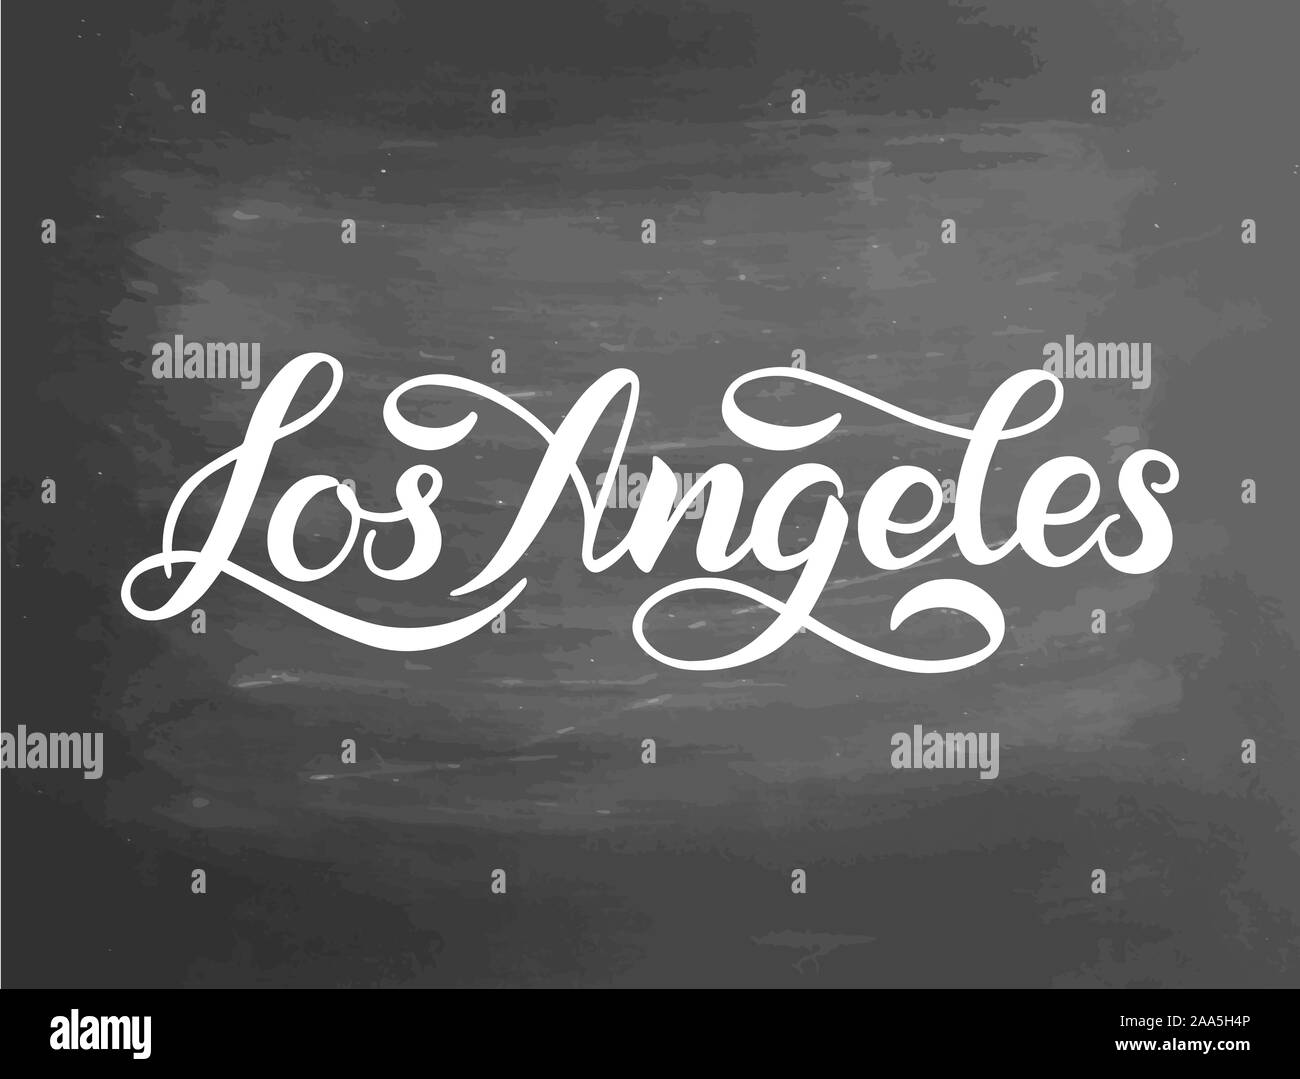 Los angeles symbol Black and White Stock Photos & Images - Alamy